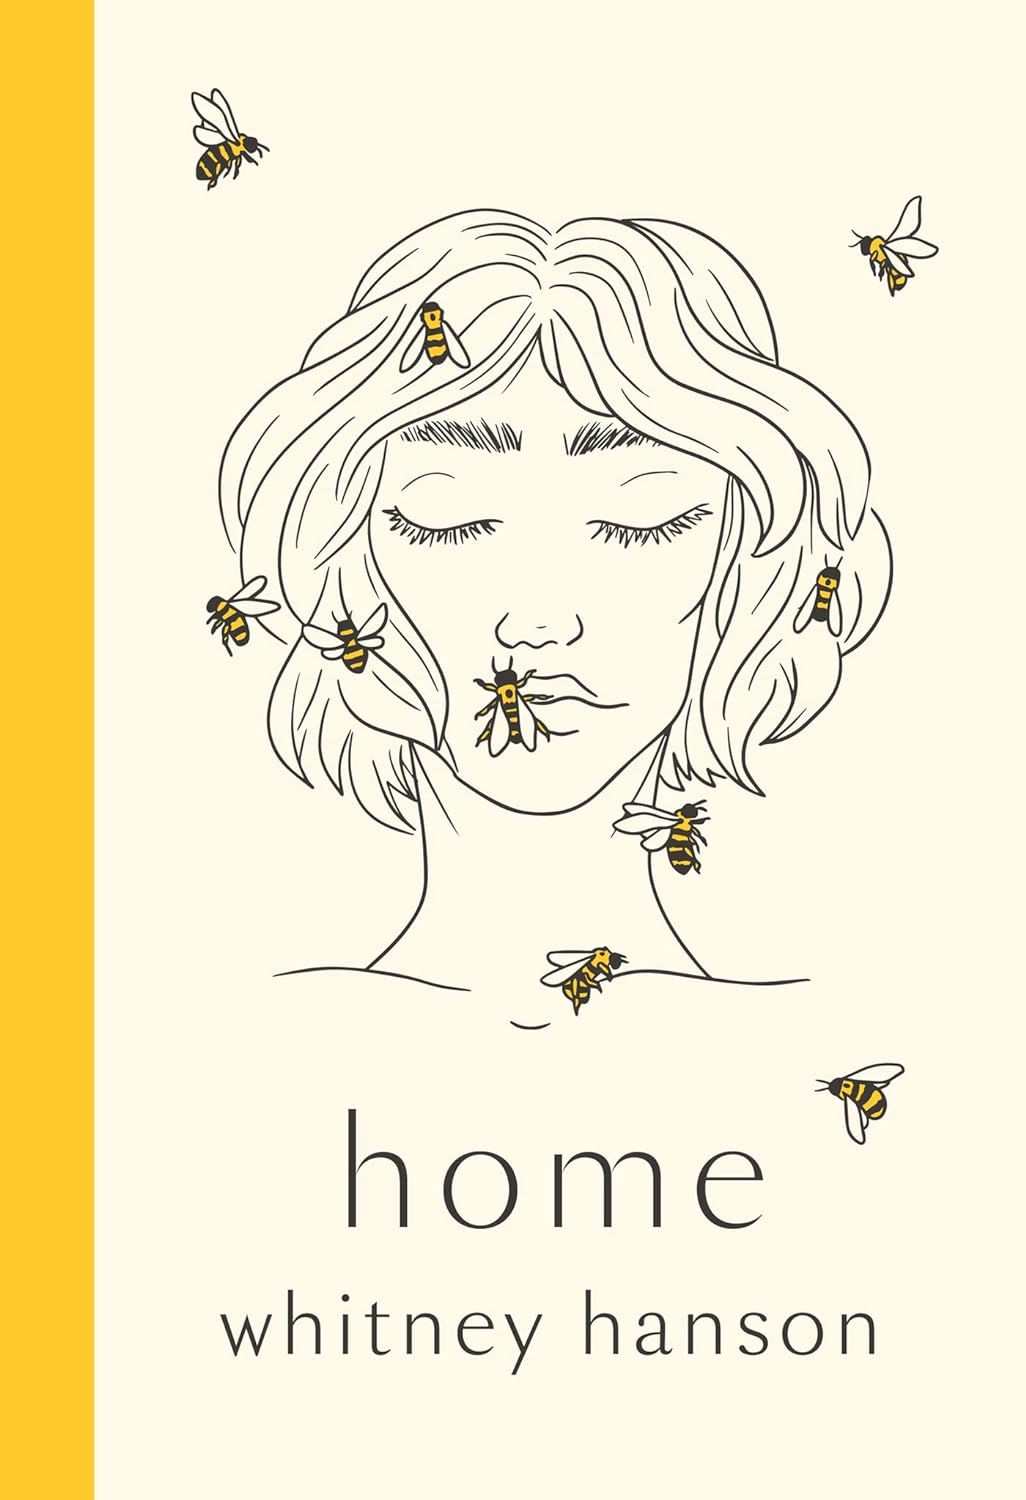 Home poems to heal your heartbreak